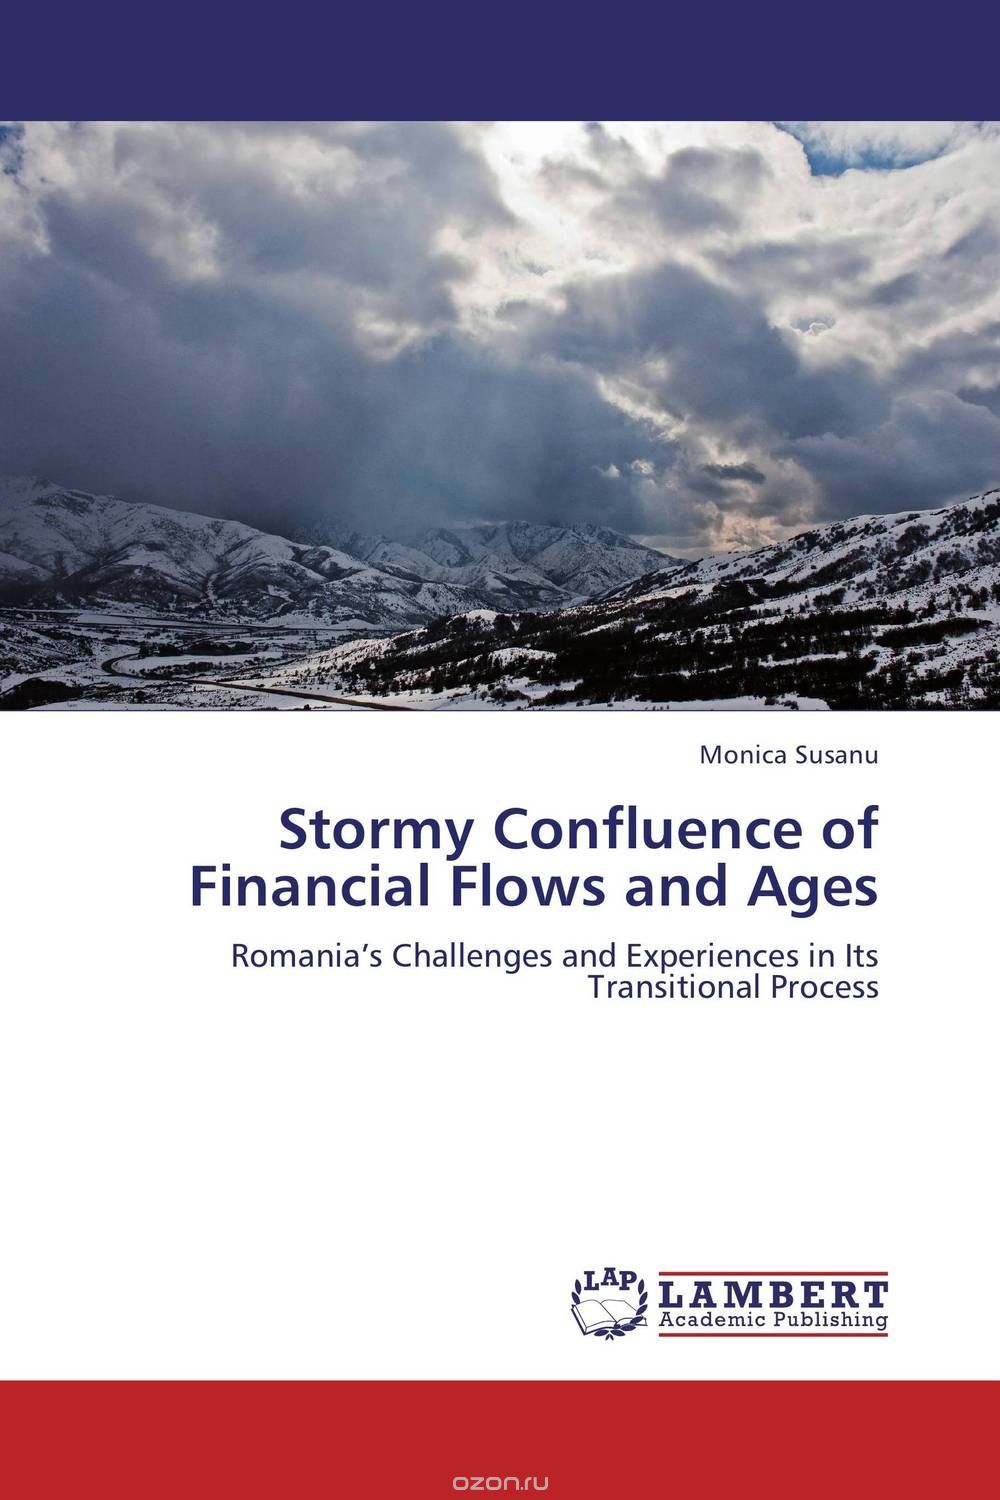 Скачать книгу "Stormy Confluence of Financial Flows and Ages"